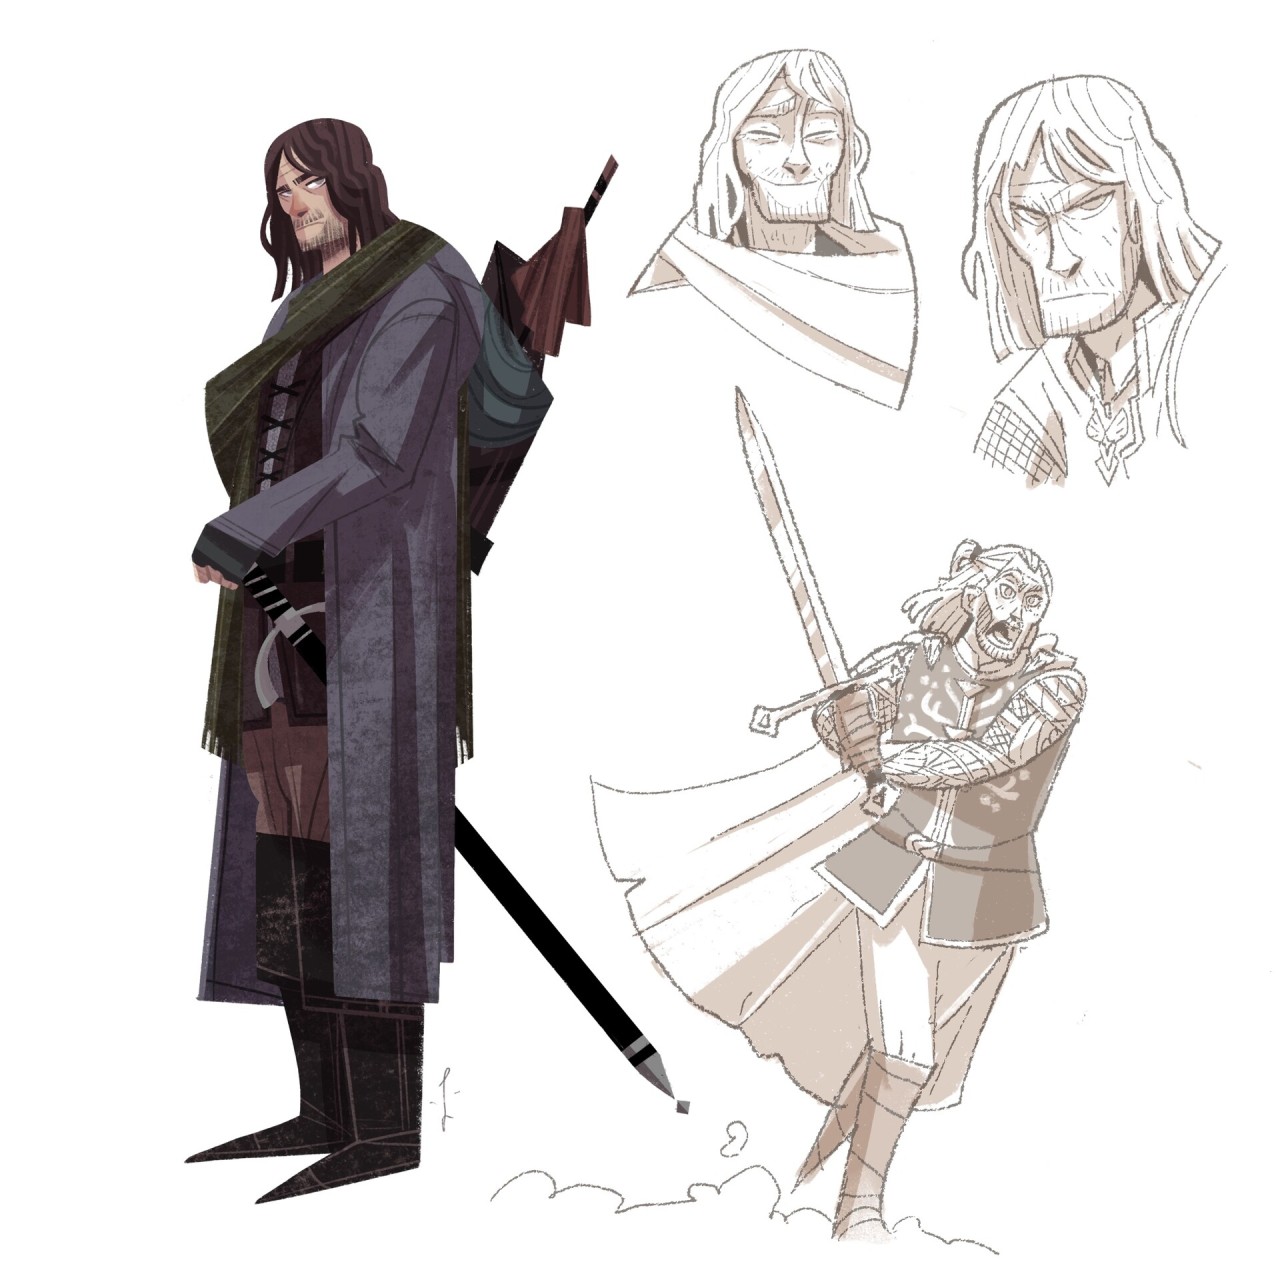 Lord of the Rings character studies by Lorenzo Colangeli